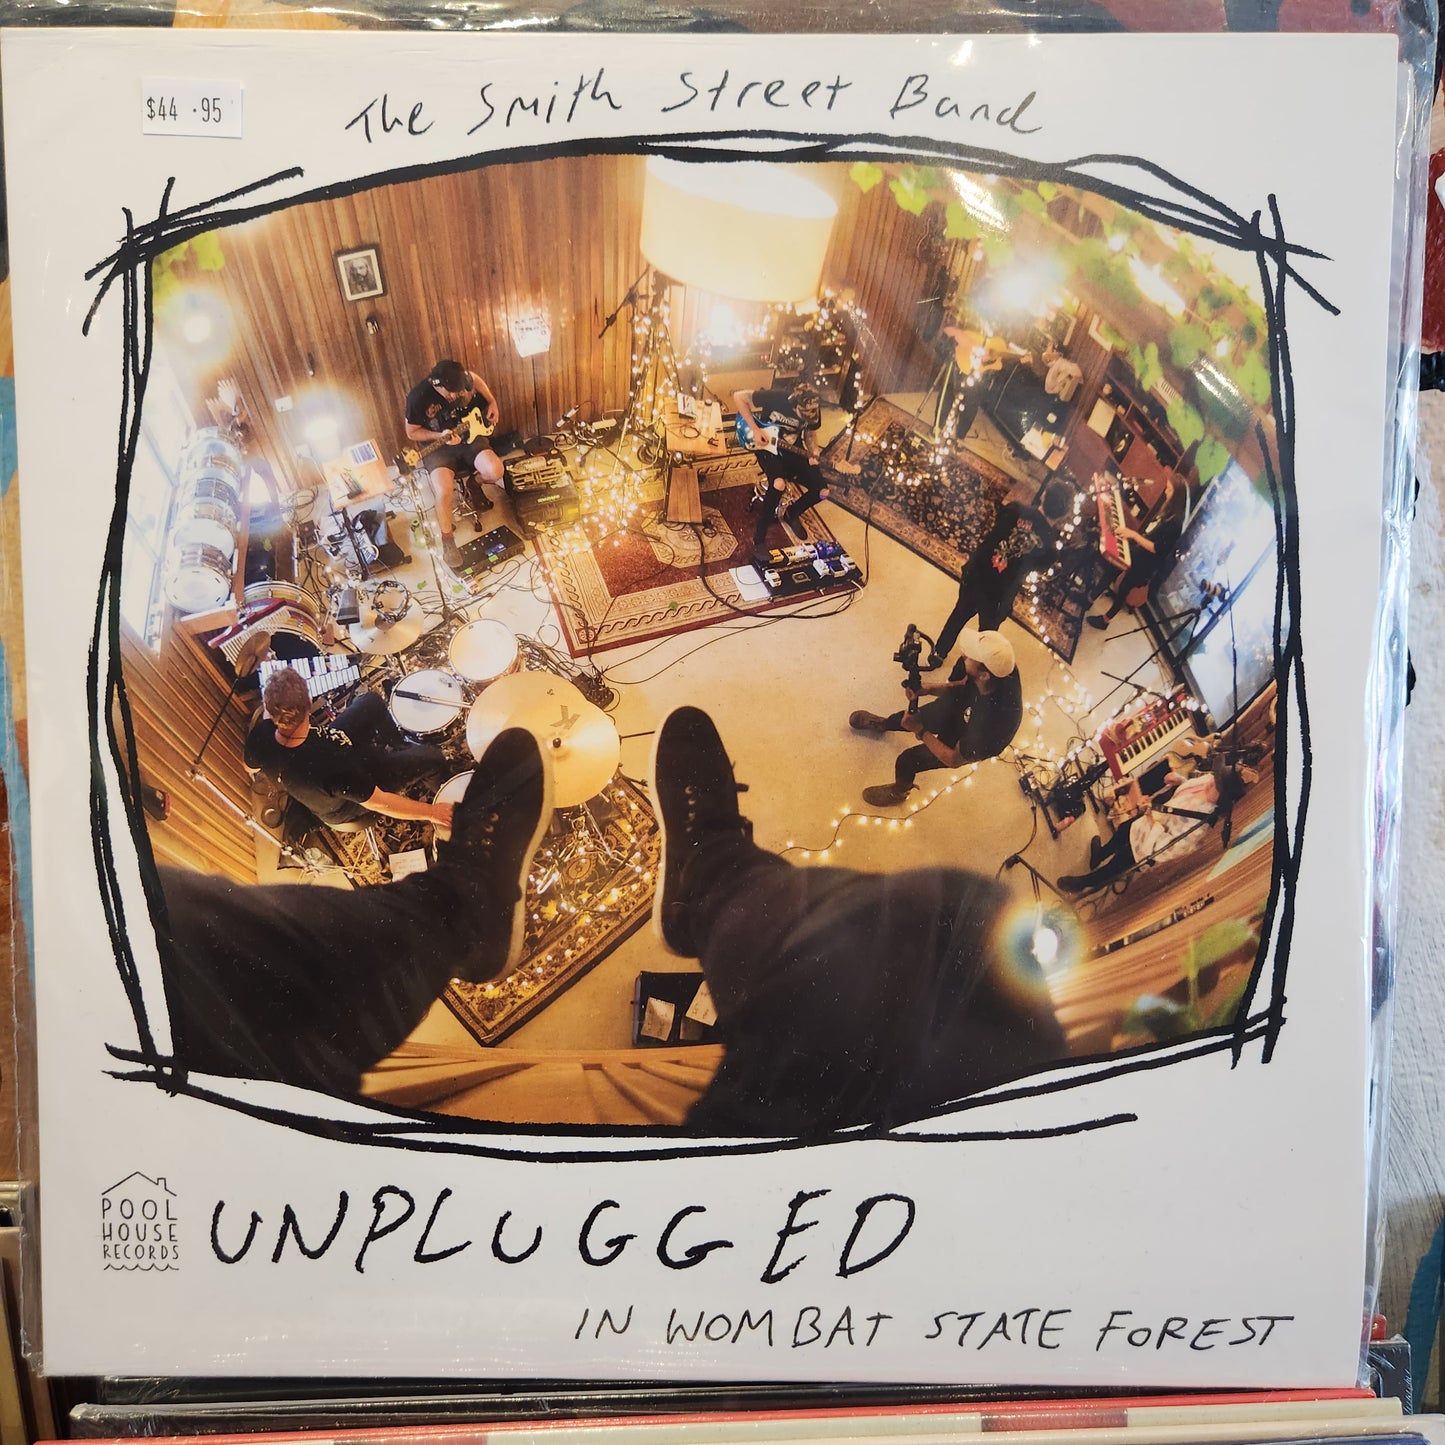 The Smith St Band - Unplugged in Wombat State Forest - Vinyl LP